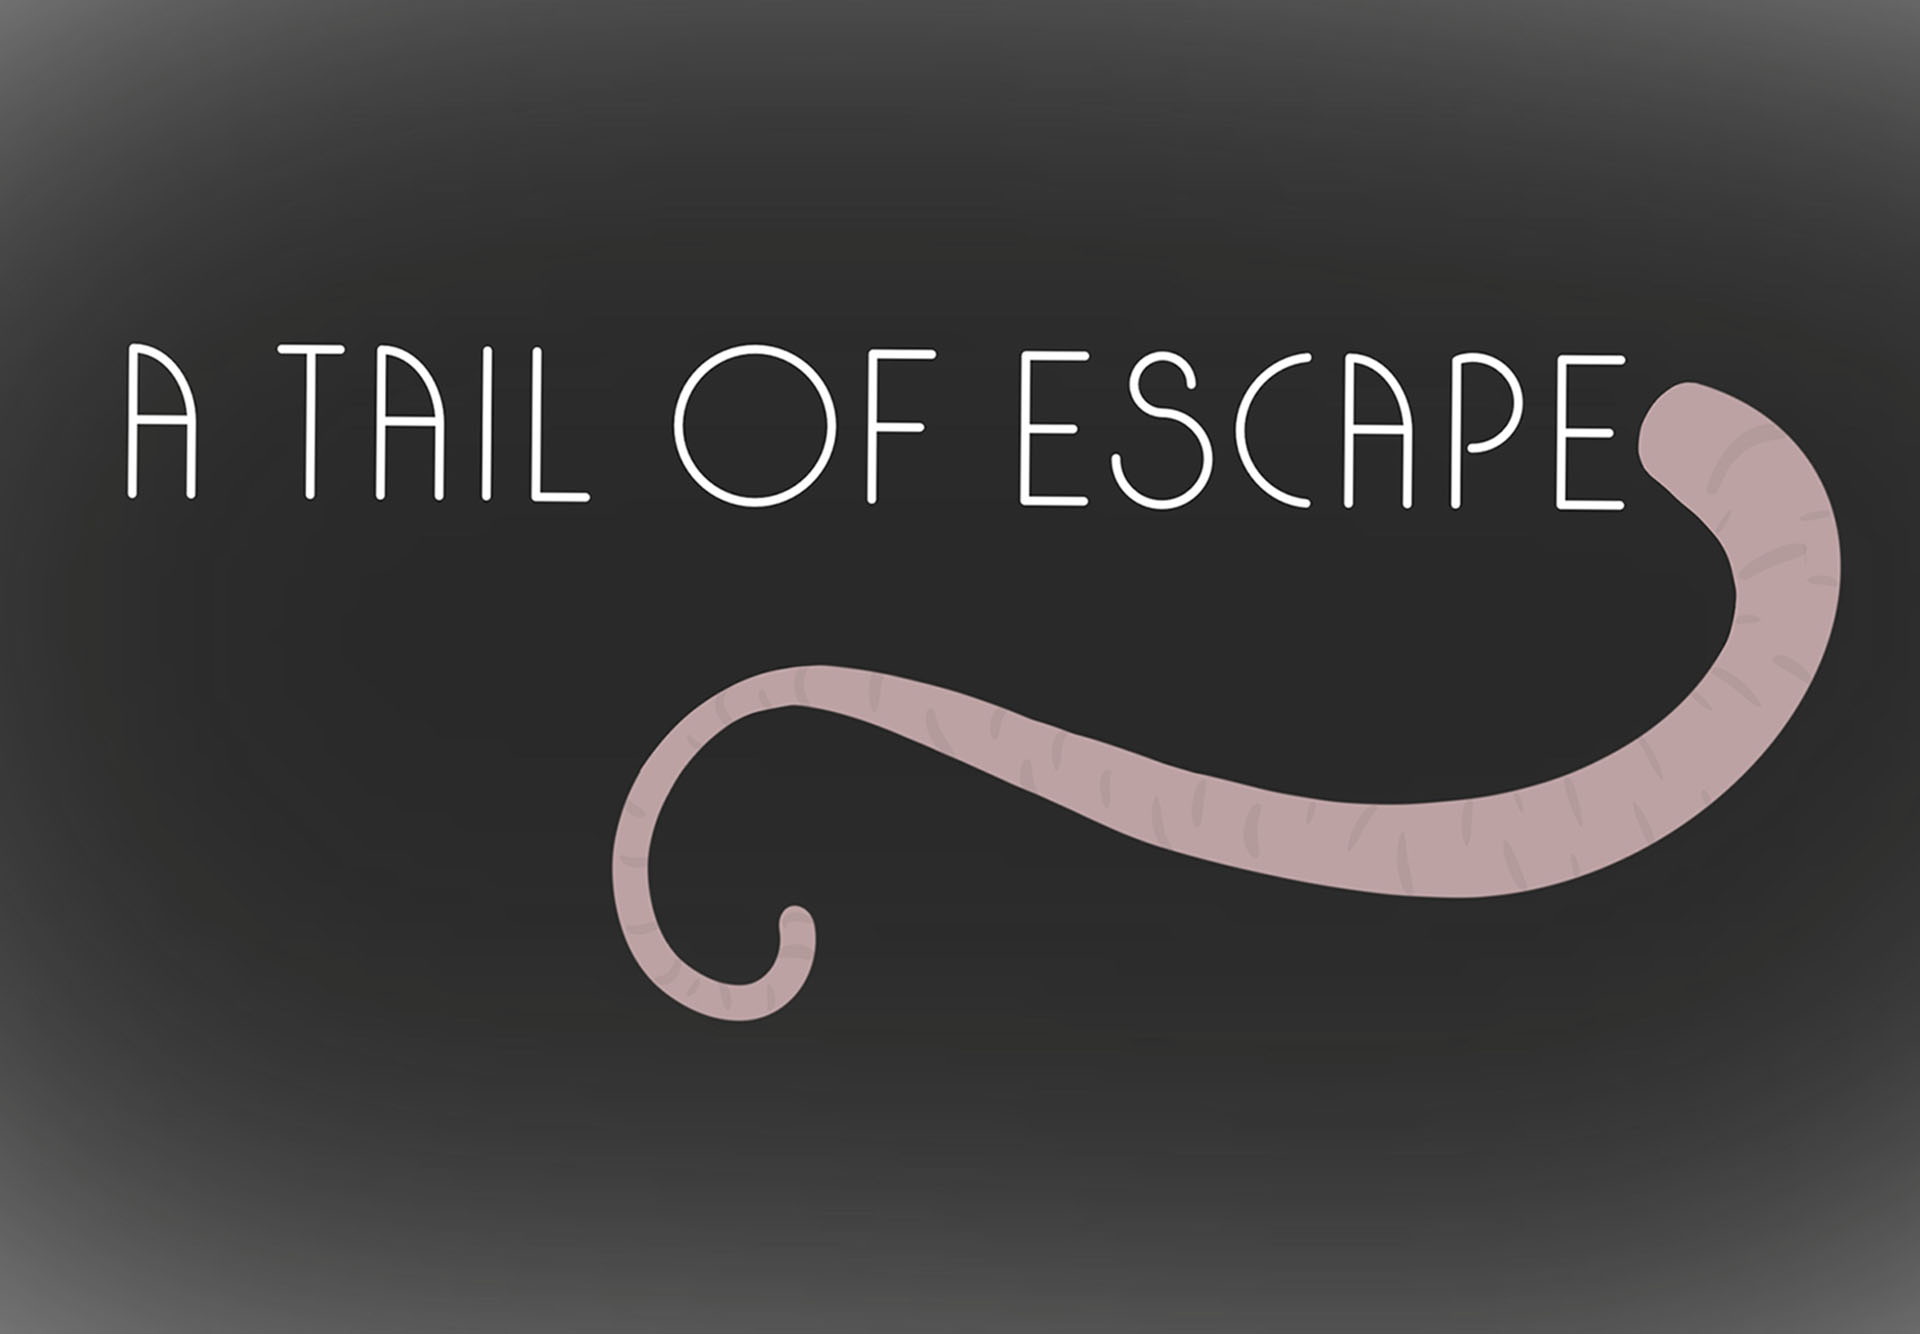 A Tail of Escape